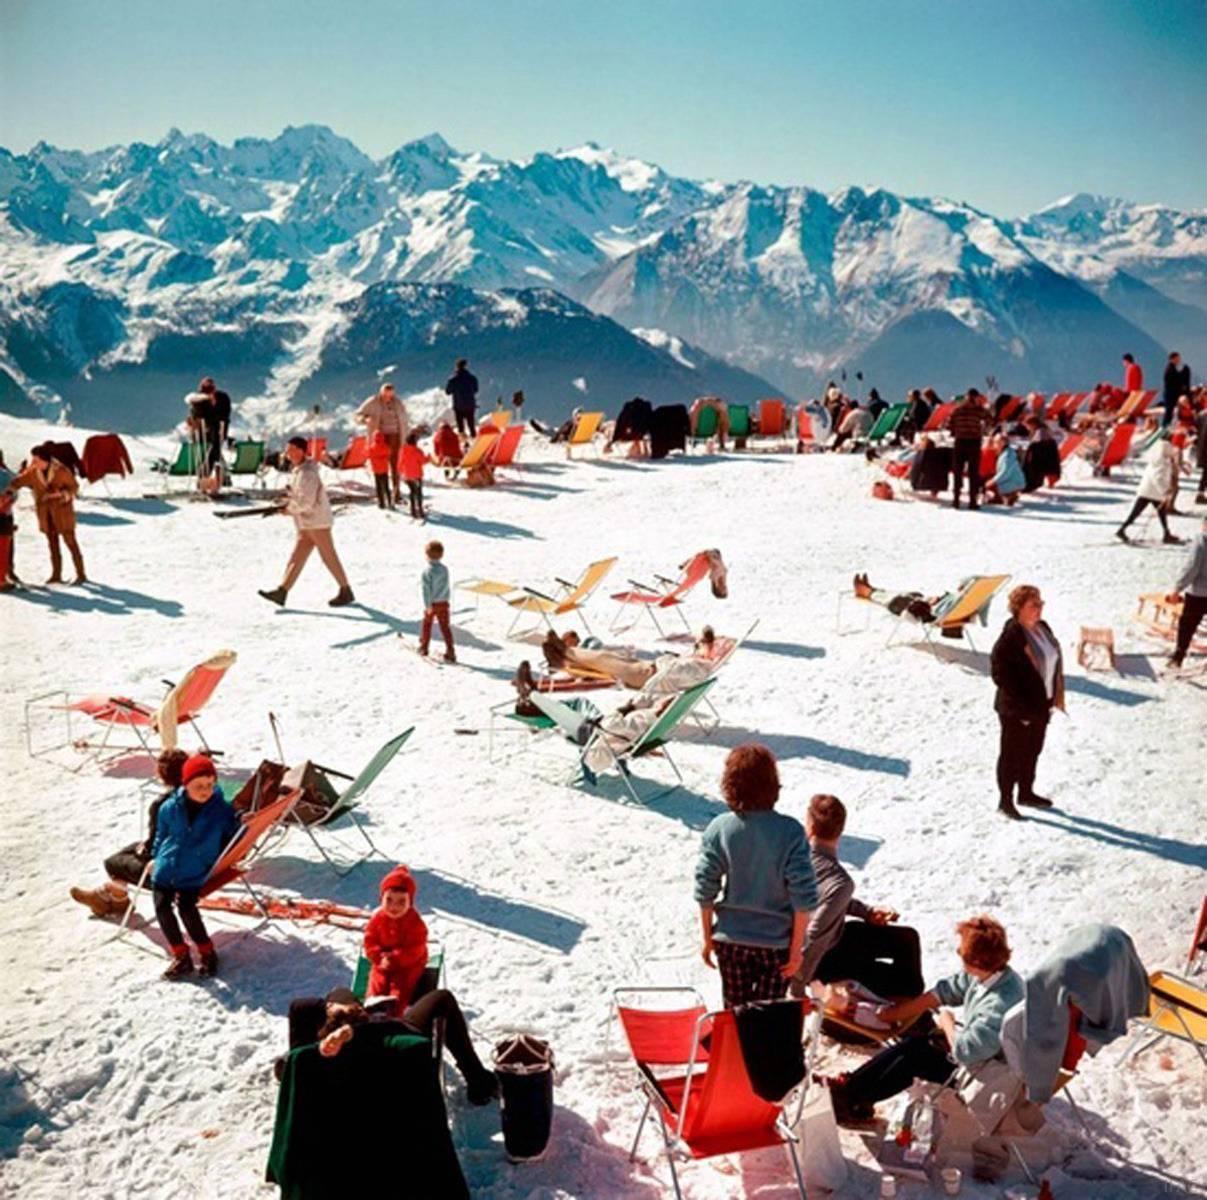 Caption: Holiday-makers take the sun on a mountain top in Verbier, 1964

Estate stamped and hand numbered edition of 150 with certificate of authenticity from the estate. 

Slim Aarons (1916-2006) worked mainly for society publications photographing